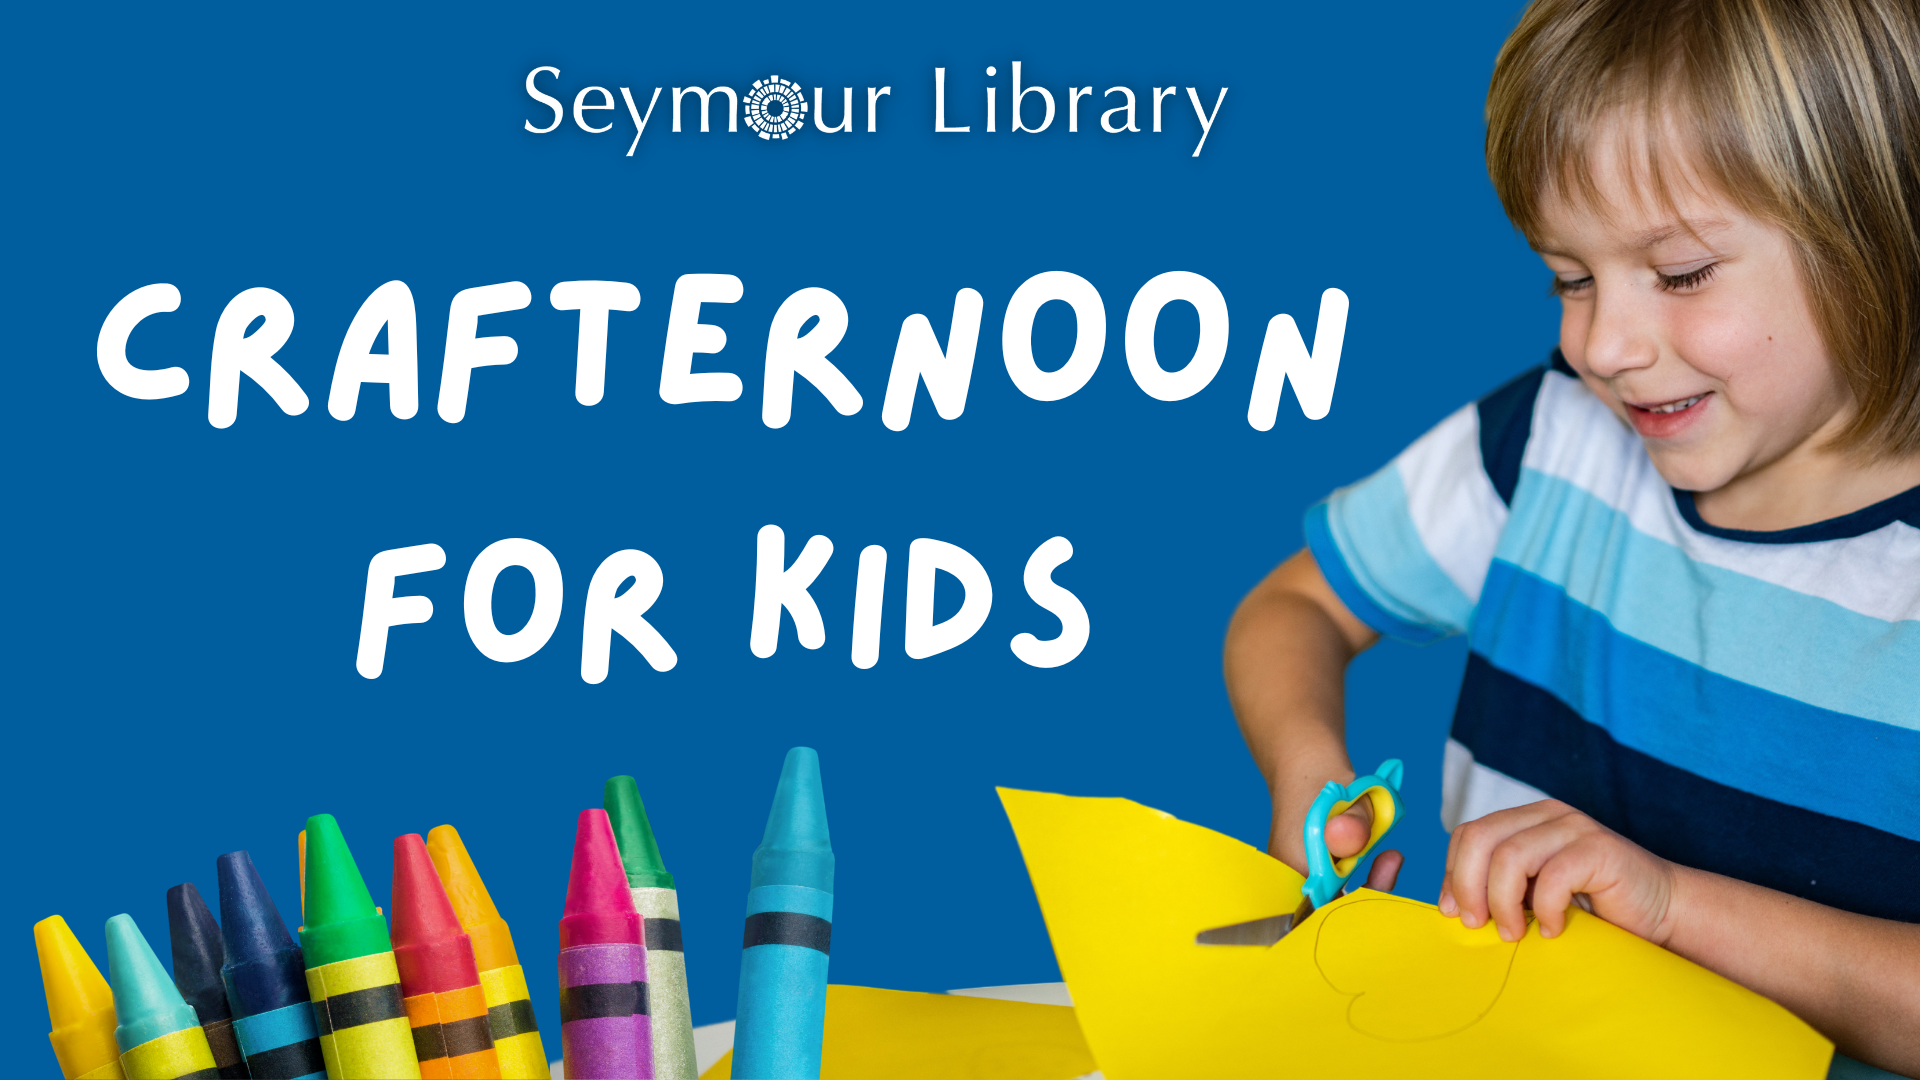 Crafternoon for Kids - with Seymour Library Logo and small child cutting paper with art supplies in foreground